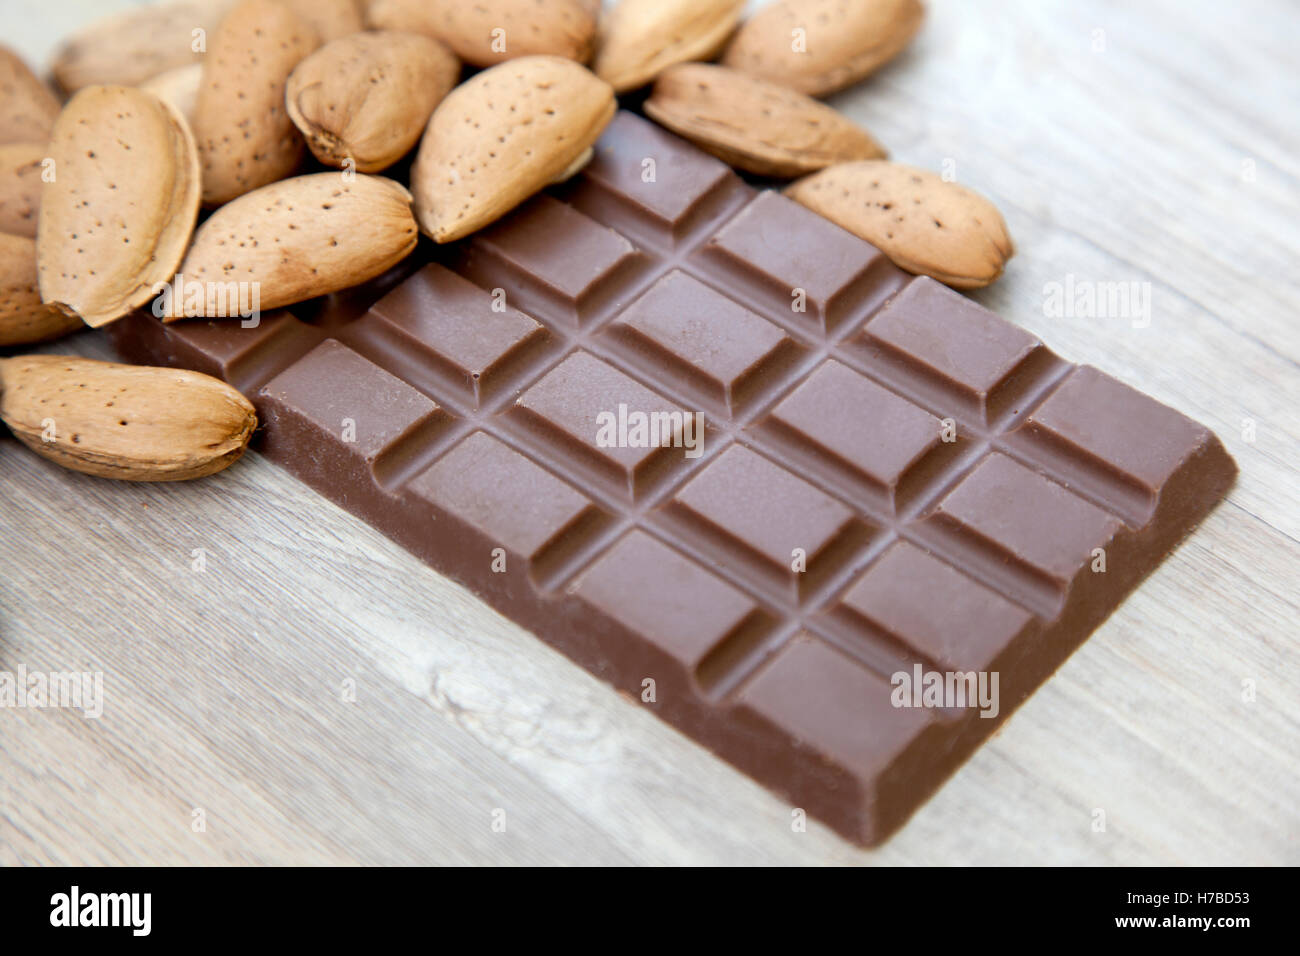 Close up of a bunch of raw almonds in their shells on a bar of milk chocolate on wooden background Stock Photo